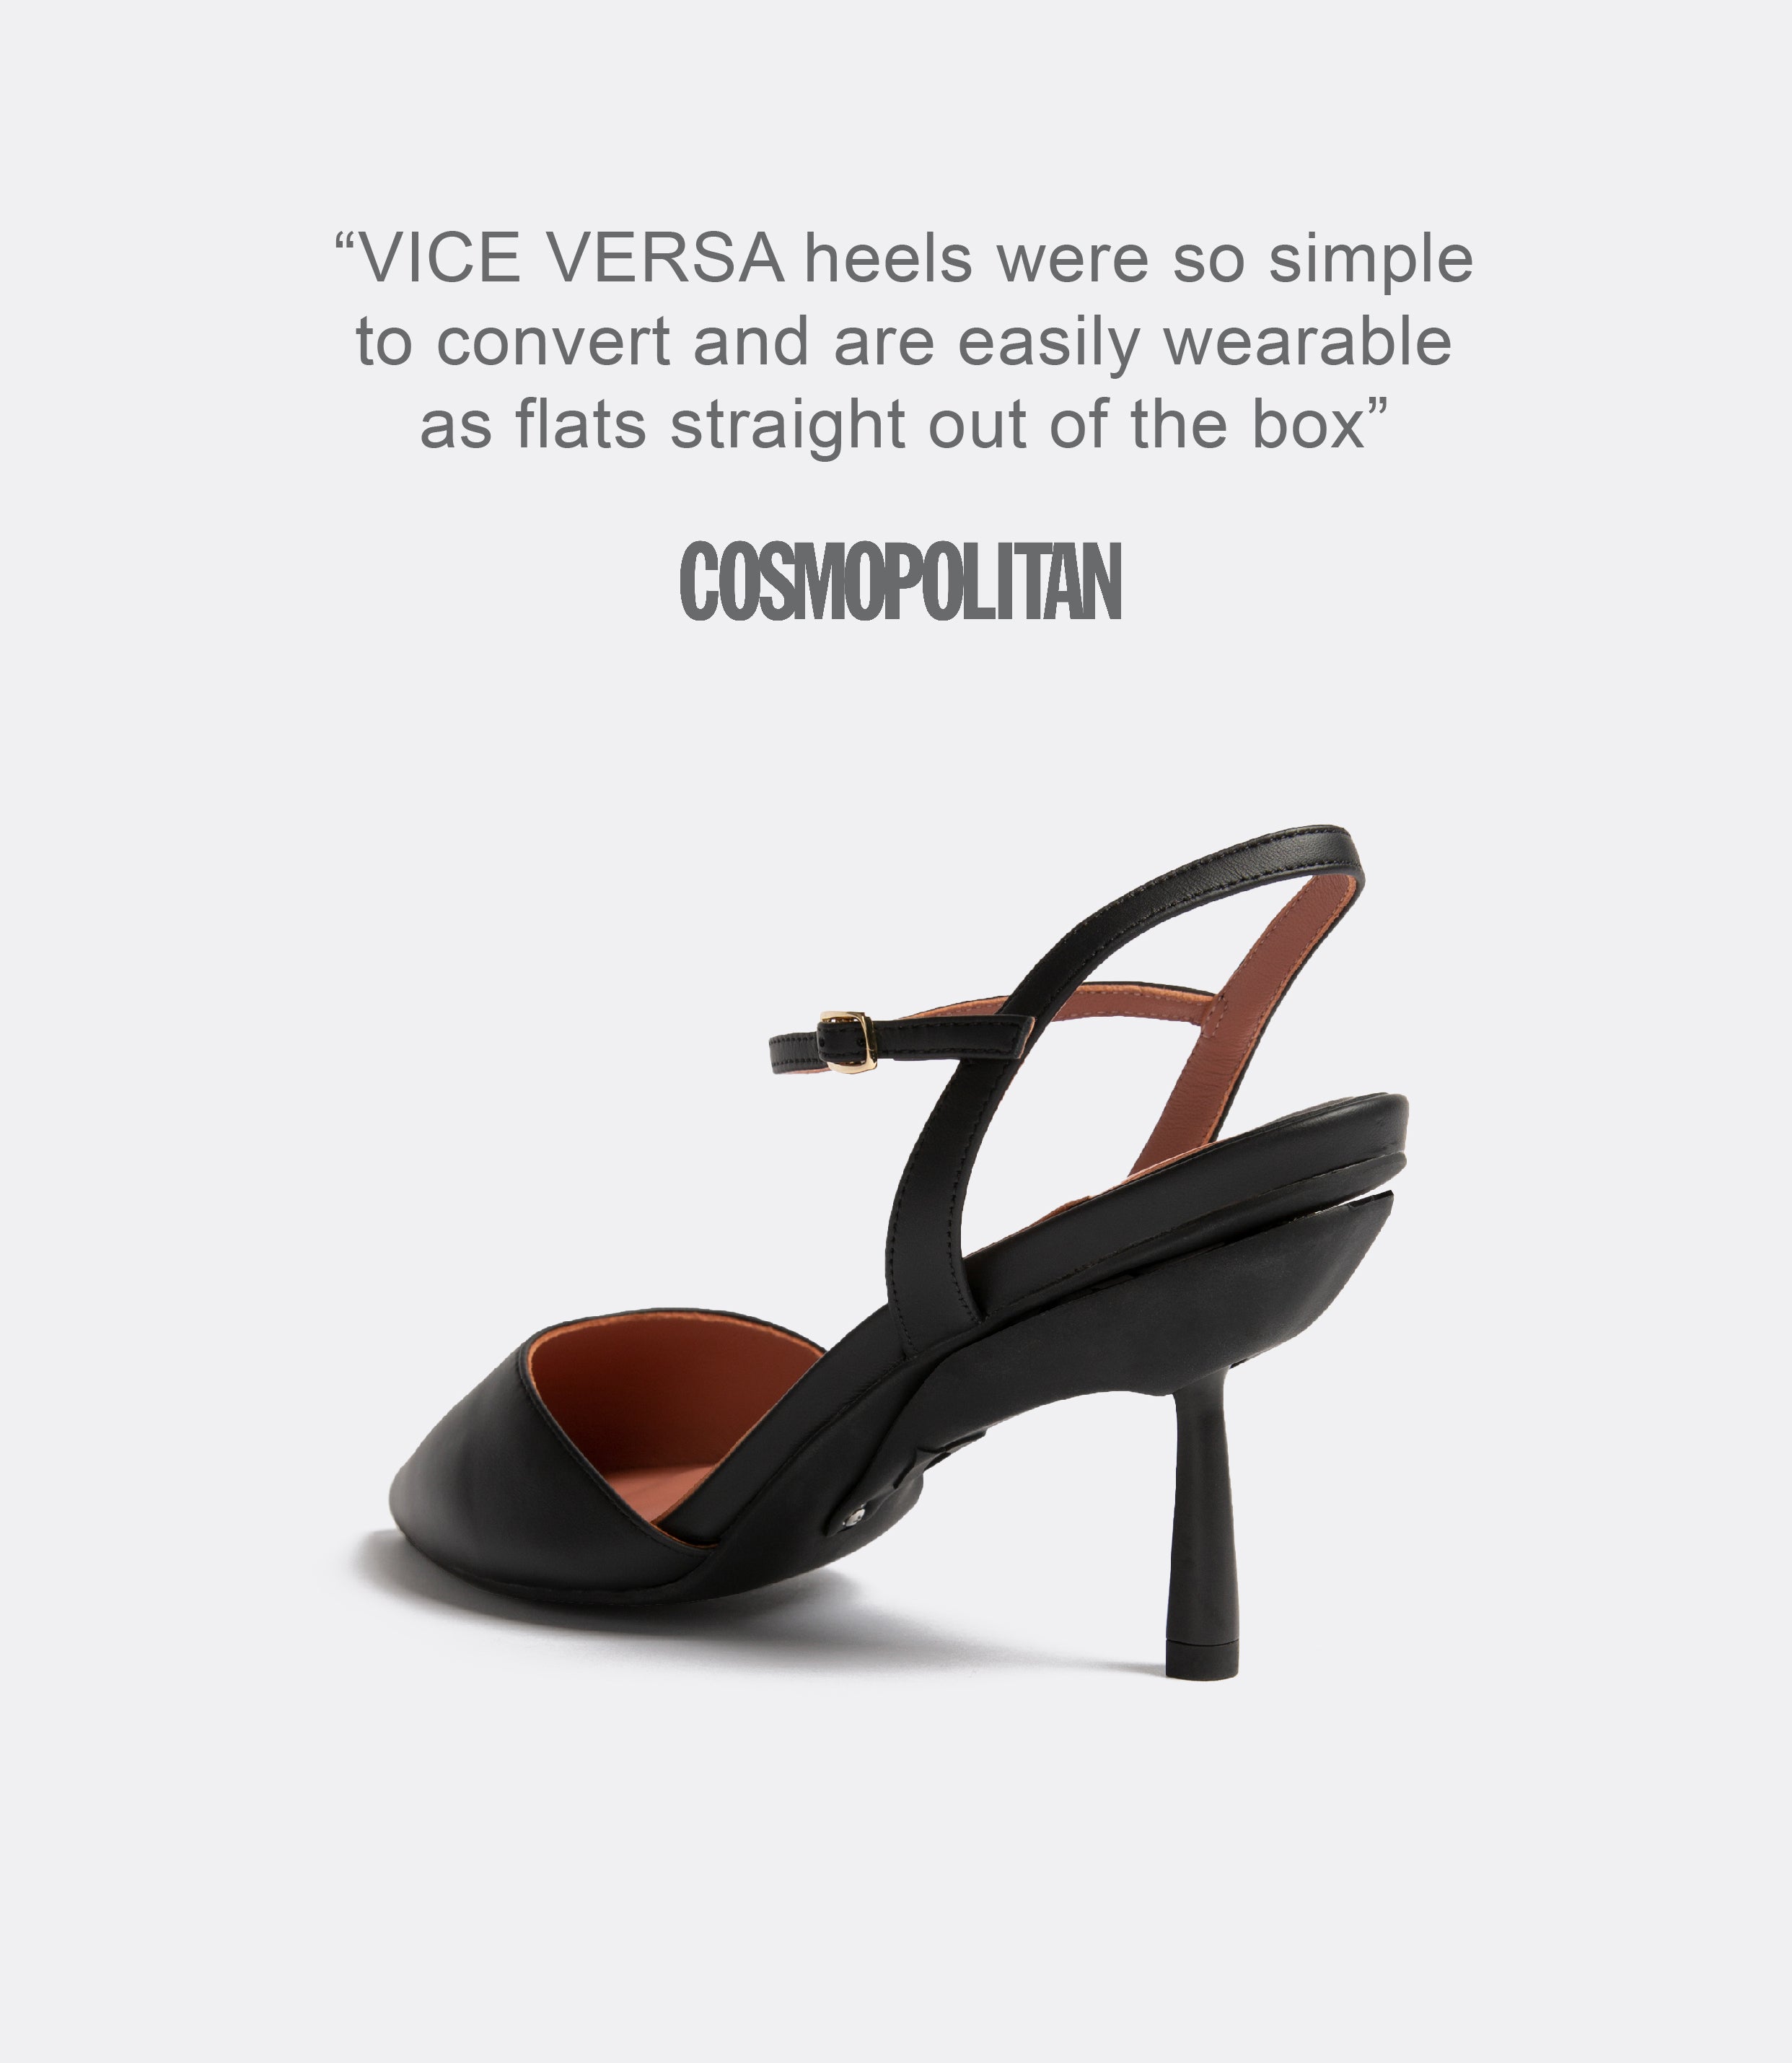 A quote from Cosmopolitan and a back view of a black leather heel.